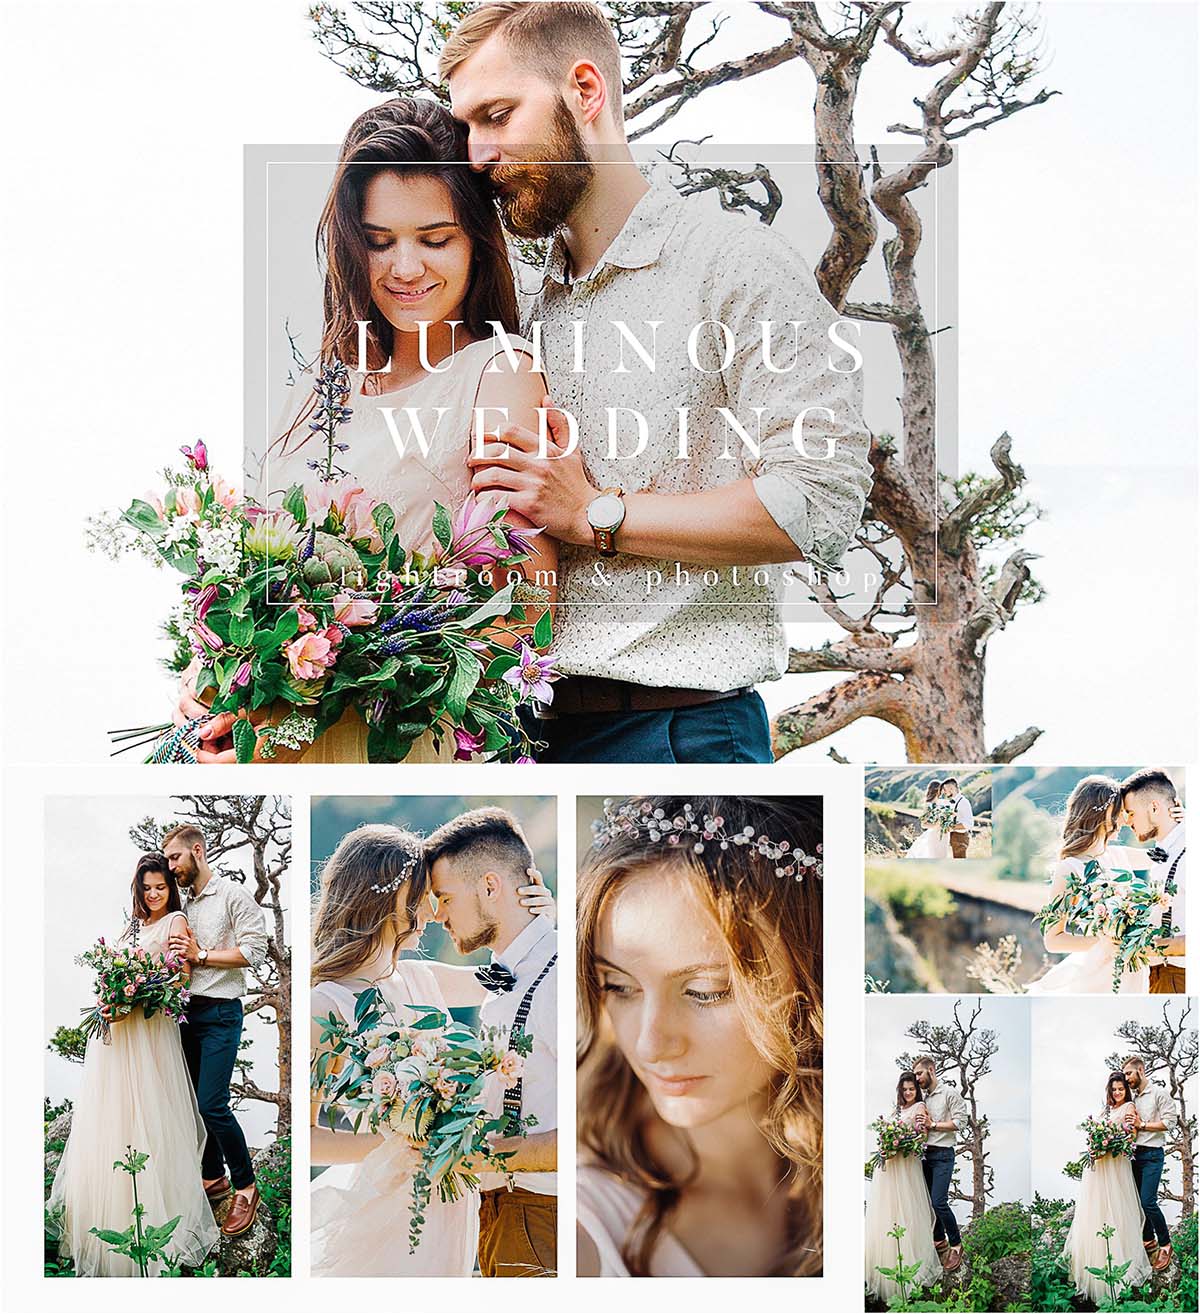 Luminious presets and actions for wedding